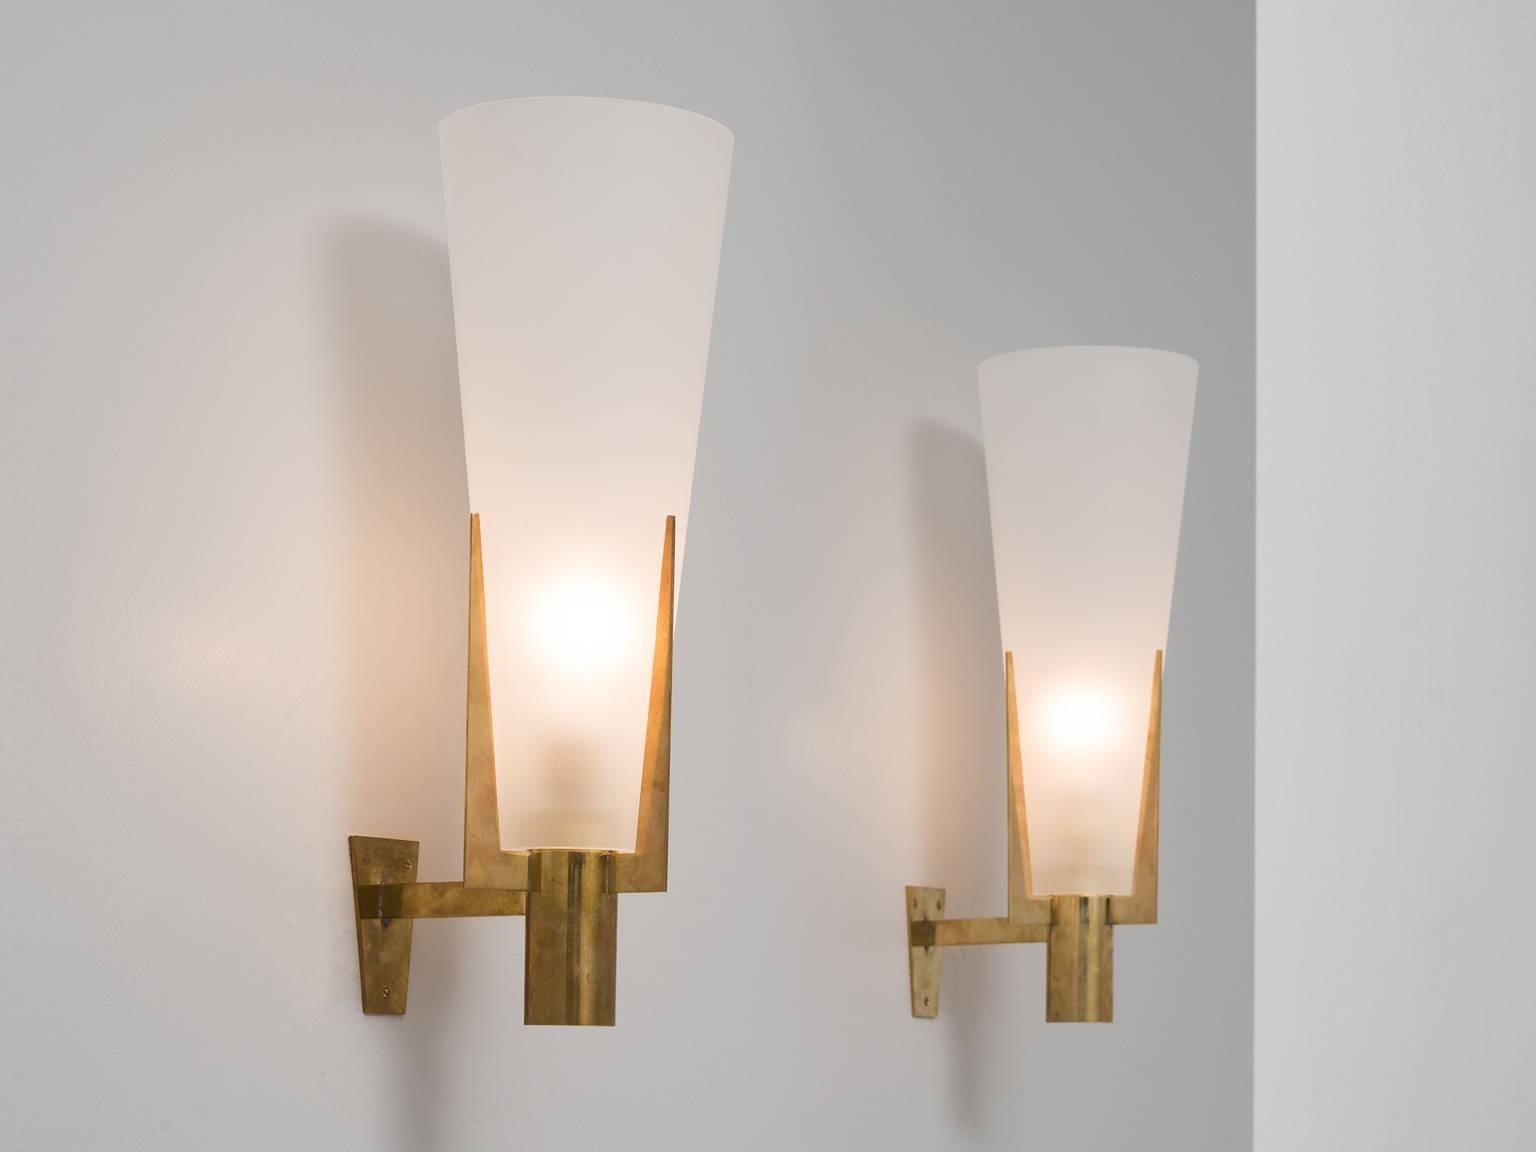 Pair of wall lights in brass and glass, Europe, 1970s.

Set of two large wall lights in brass and frosted glass. These sconces hold a beautiful brass frame with an admirable patina. Three 'pins' hold the large opal conical shade. Due the large